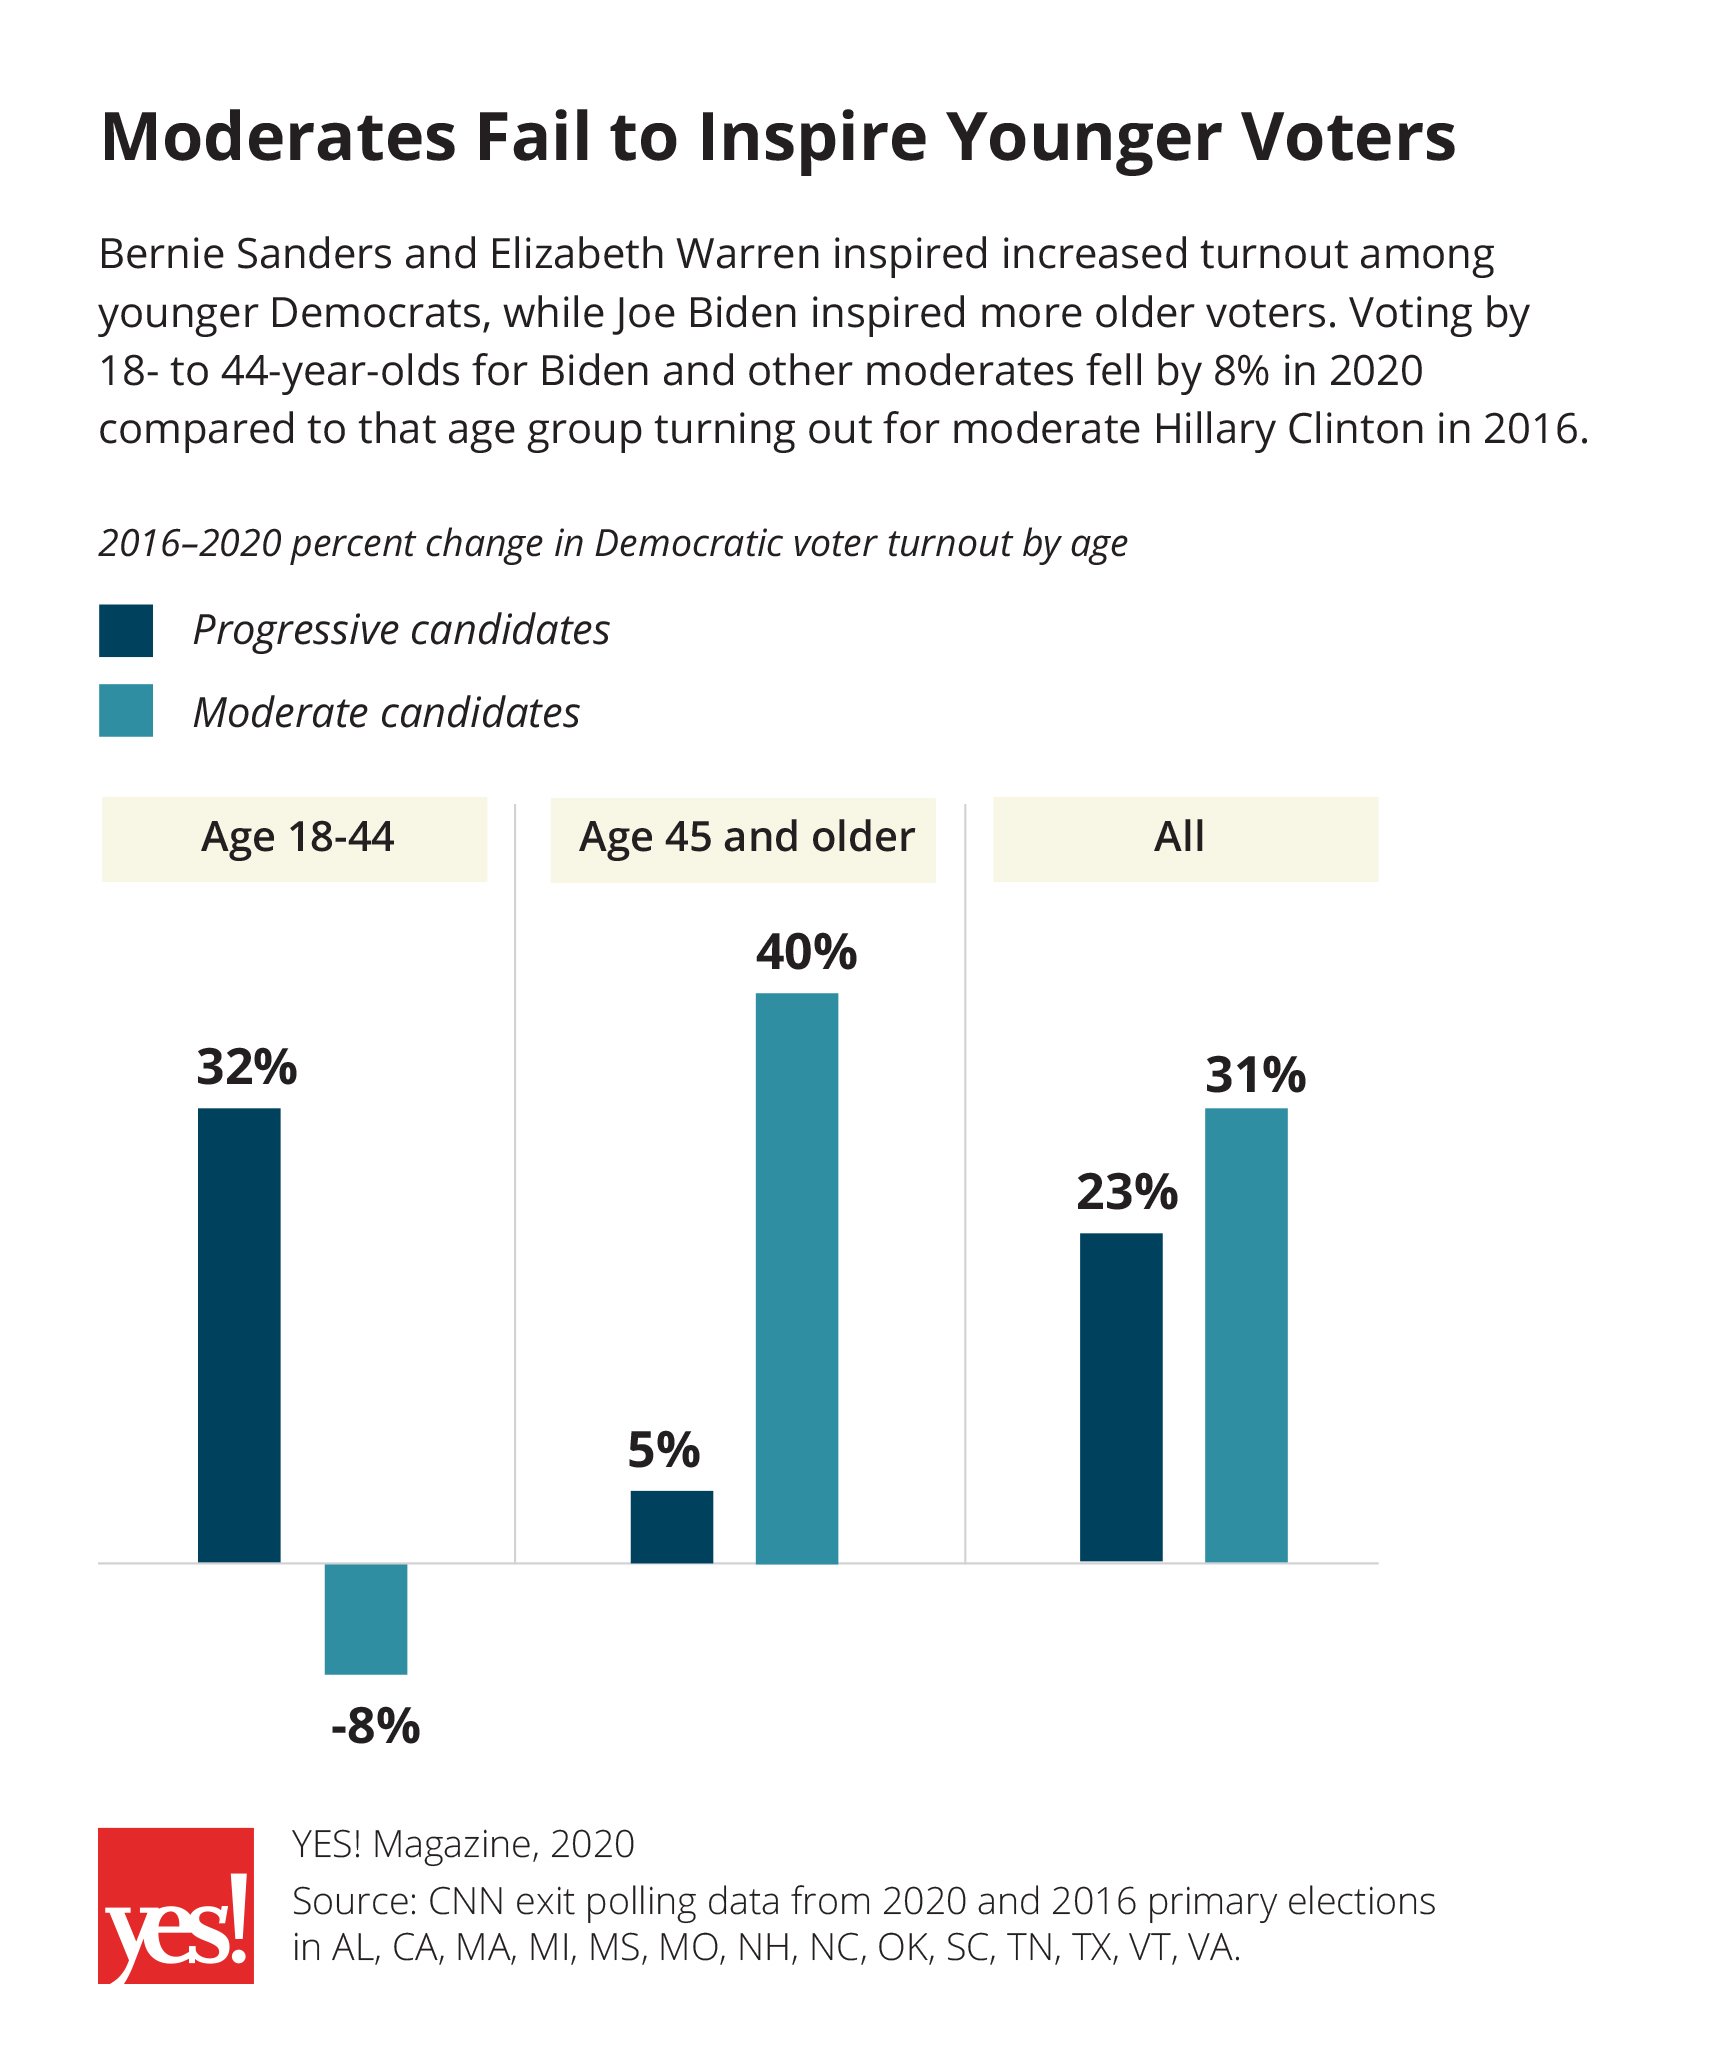 2020 presidential candidate ages: Explore the generation gap